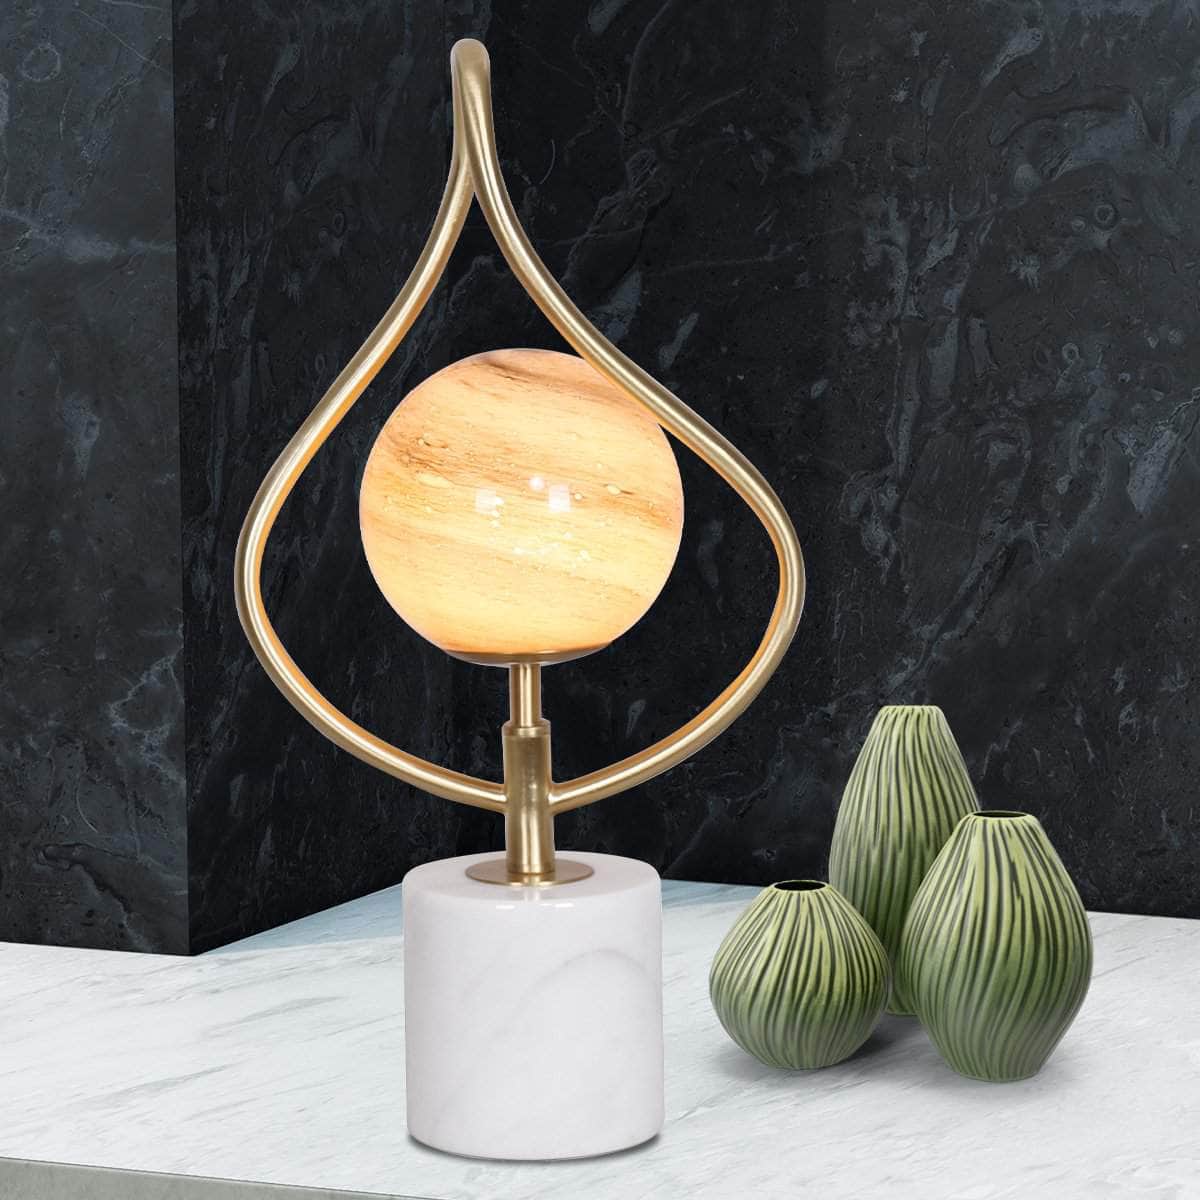 Orange Glass Table Lamp with White Marble Base